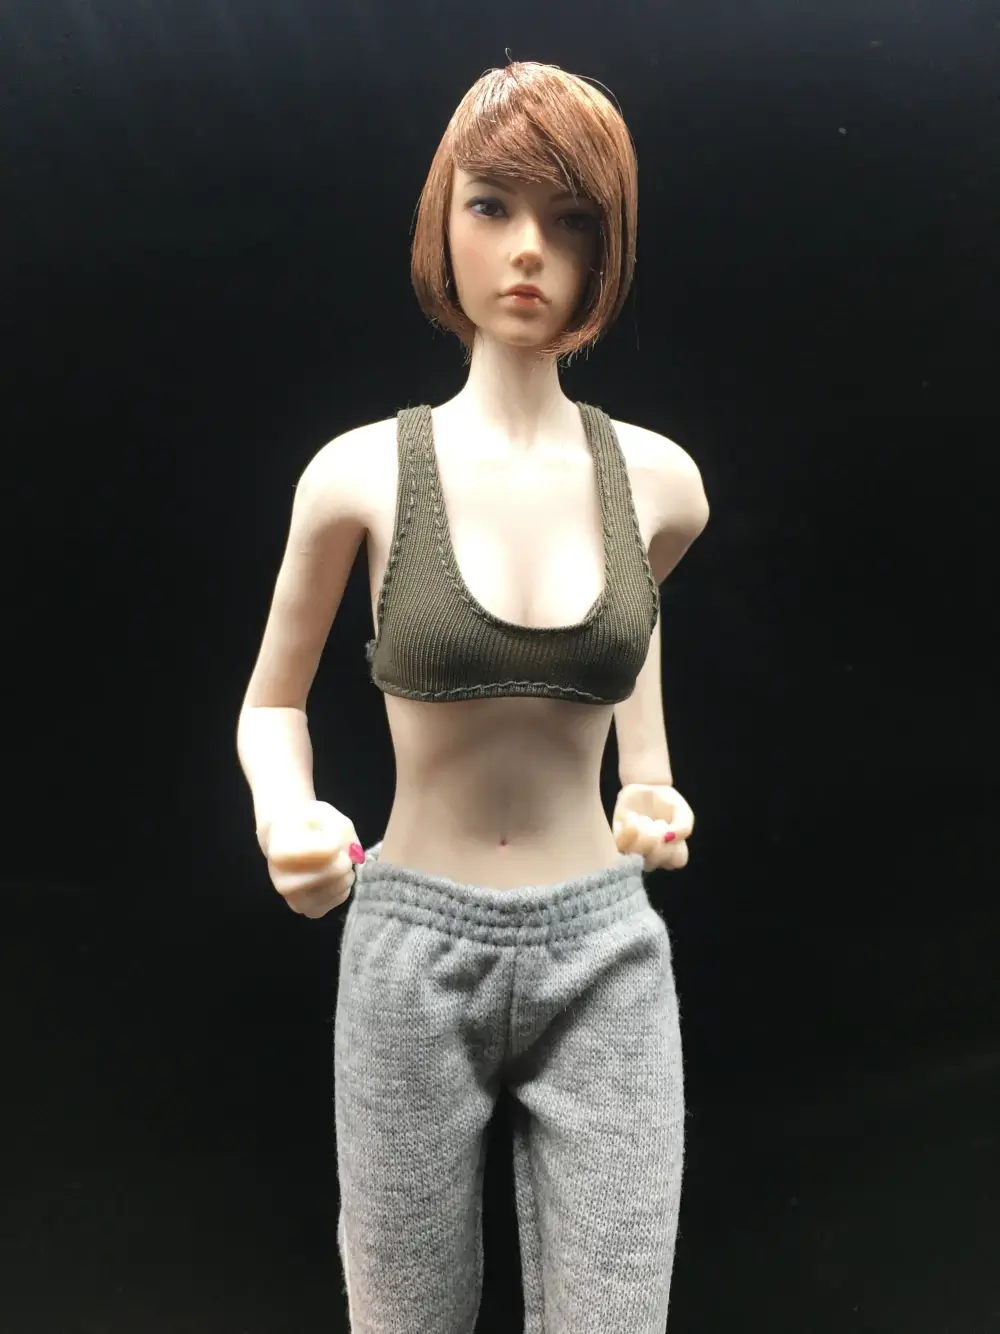 Wholesale 1/6 Female Clothes, Fab Figures, Create A Custom Action Figure  Of Your Own